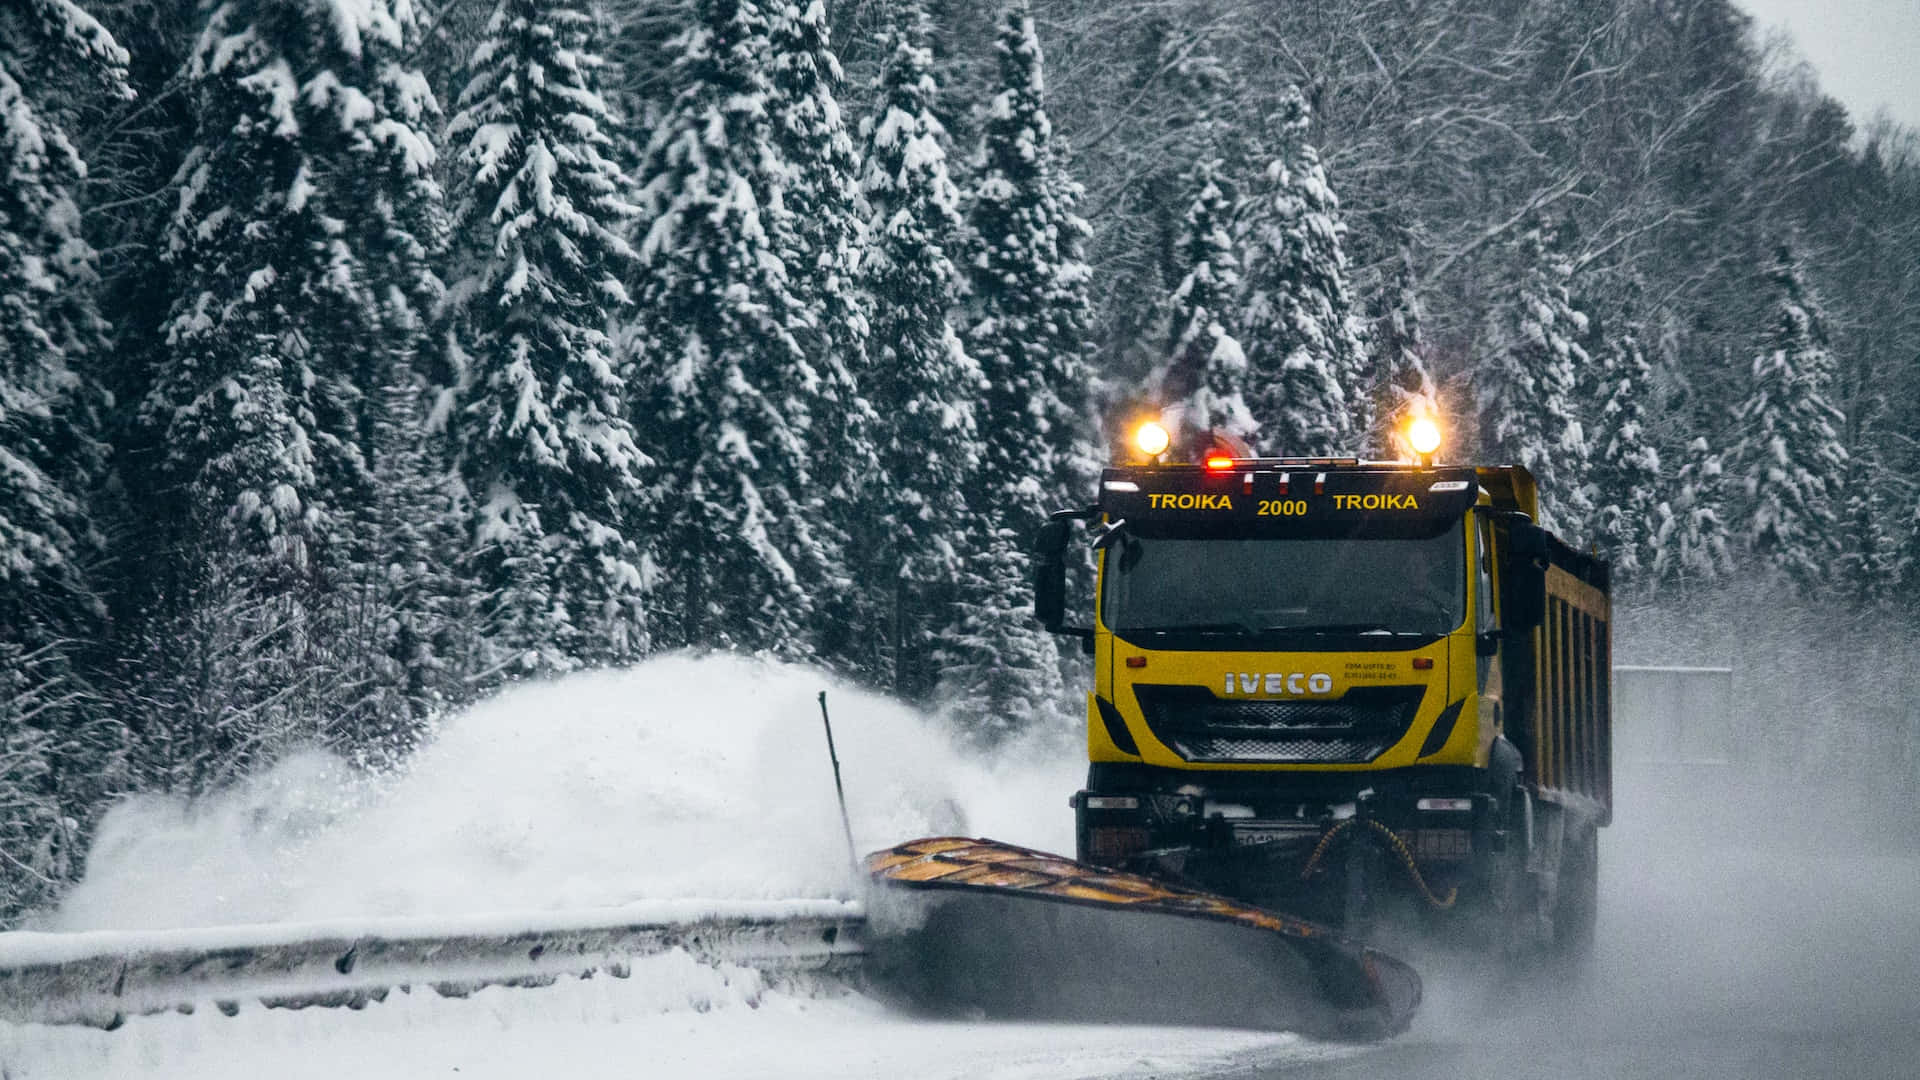 Snowplow clearing a snowy road on a winter day Wallpaper